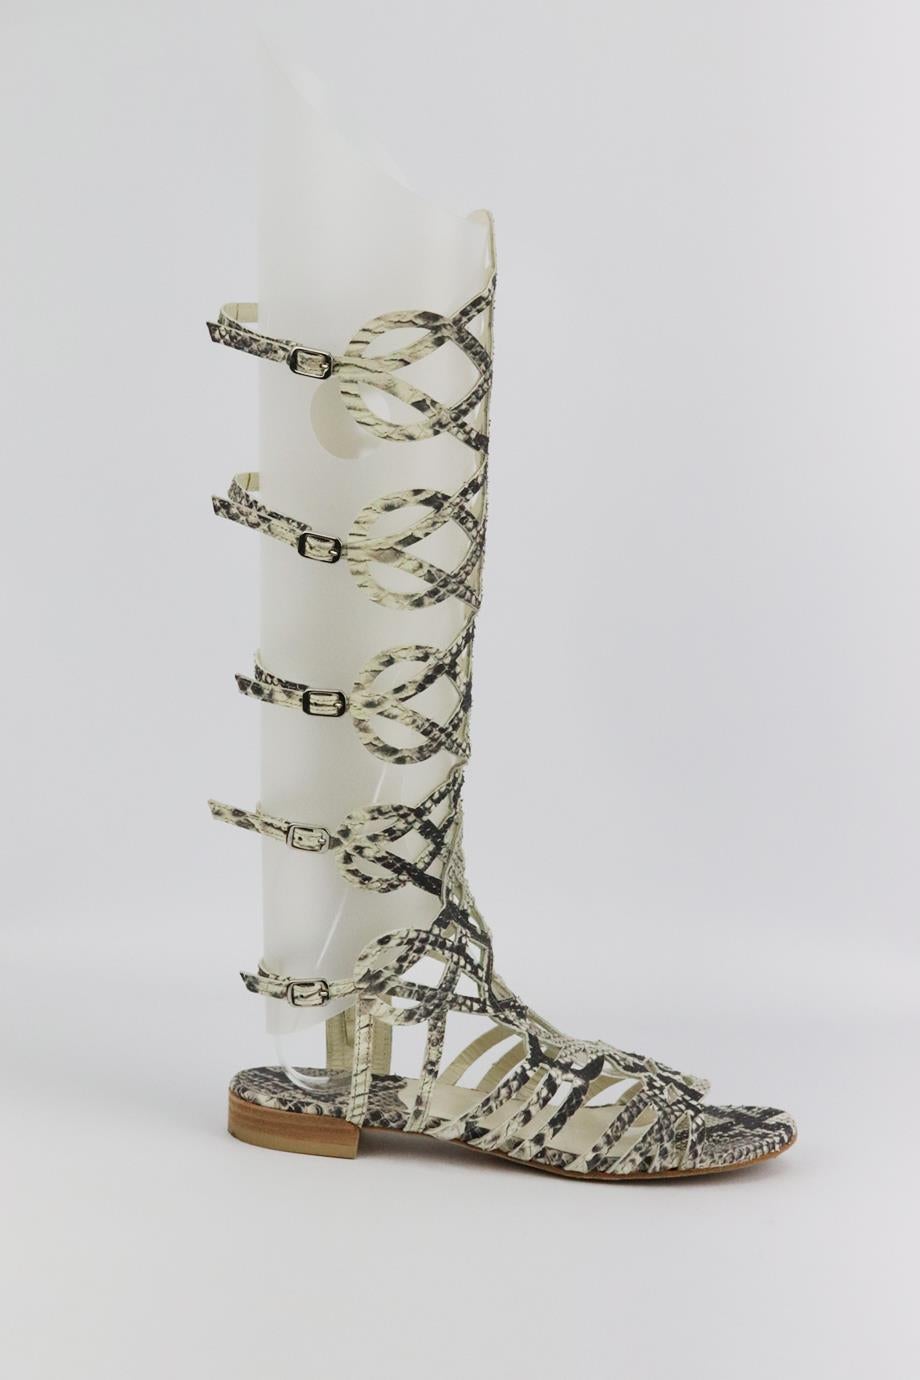 Stuart Weitzman cutout snake effect leather sandals. Made from tonal-grey snake-effect leather in a cutout design. Tonal-grey. Zip fastening at side. Does not come with box and dustbag. Size: EU 37 (UK 4, US 7). Shaft: 14.5 in. Insole: 9.5 in. Heel: